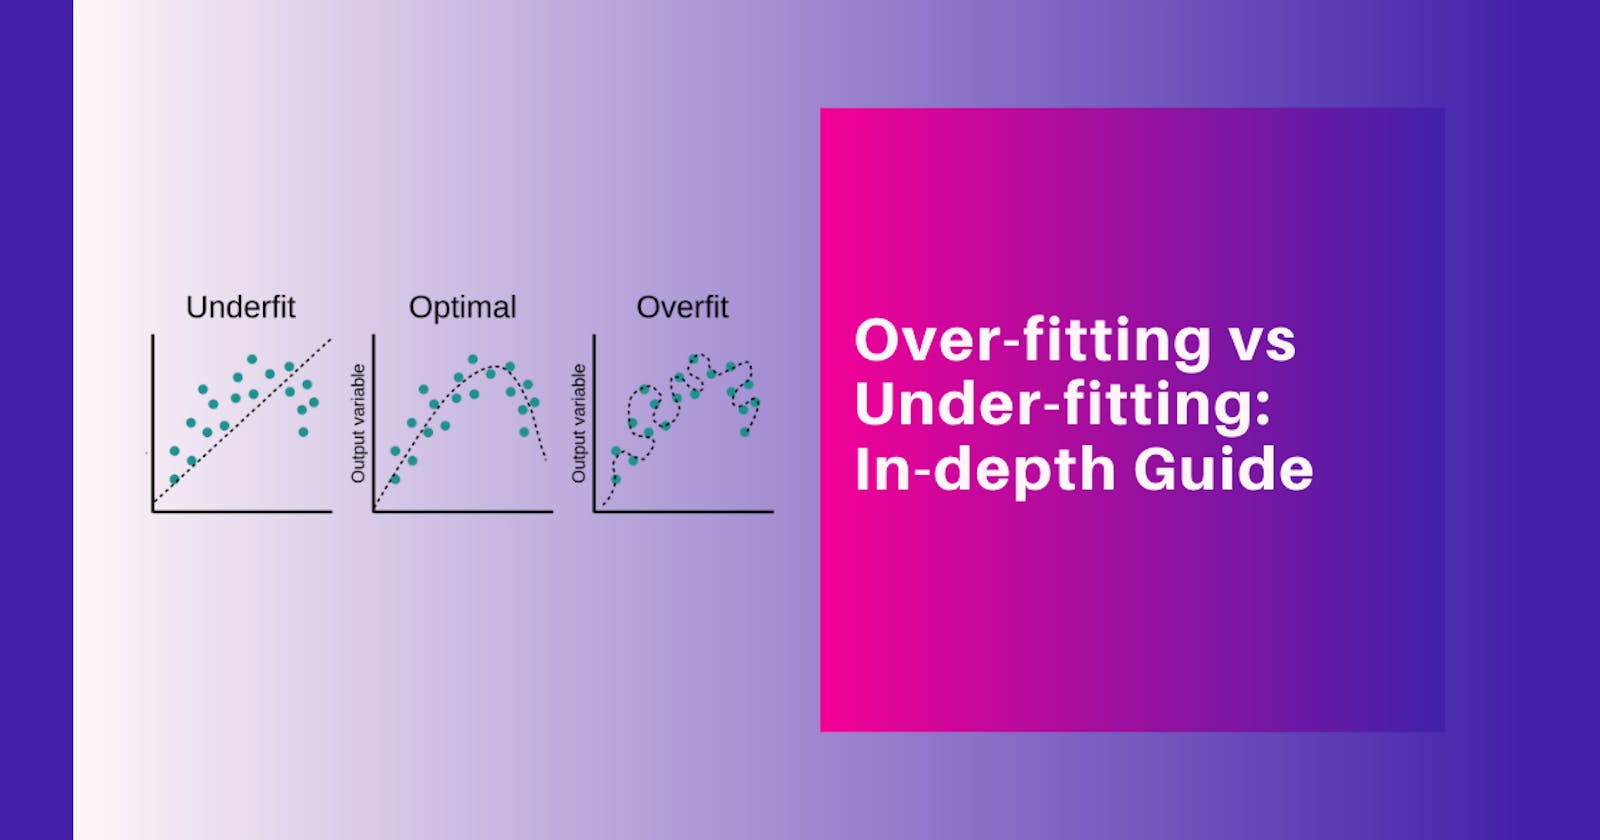 Guide for Over-fitting vs Under-fitting